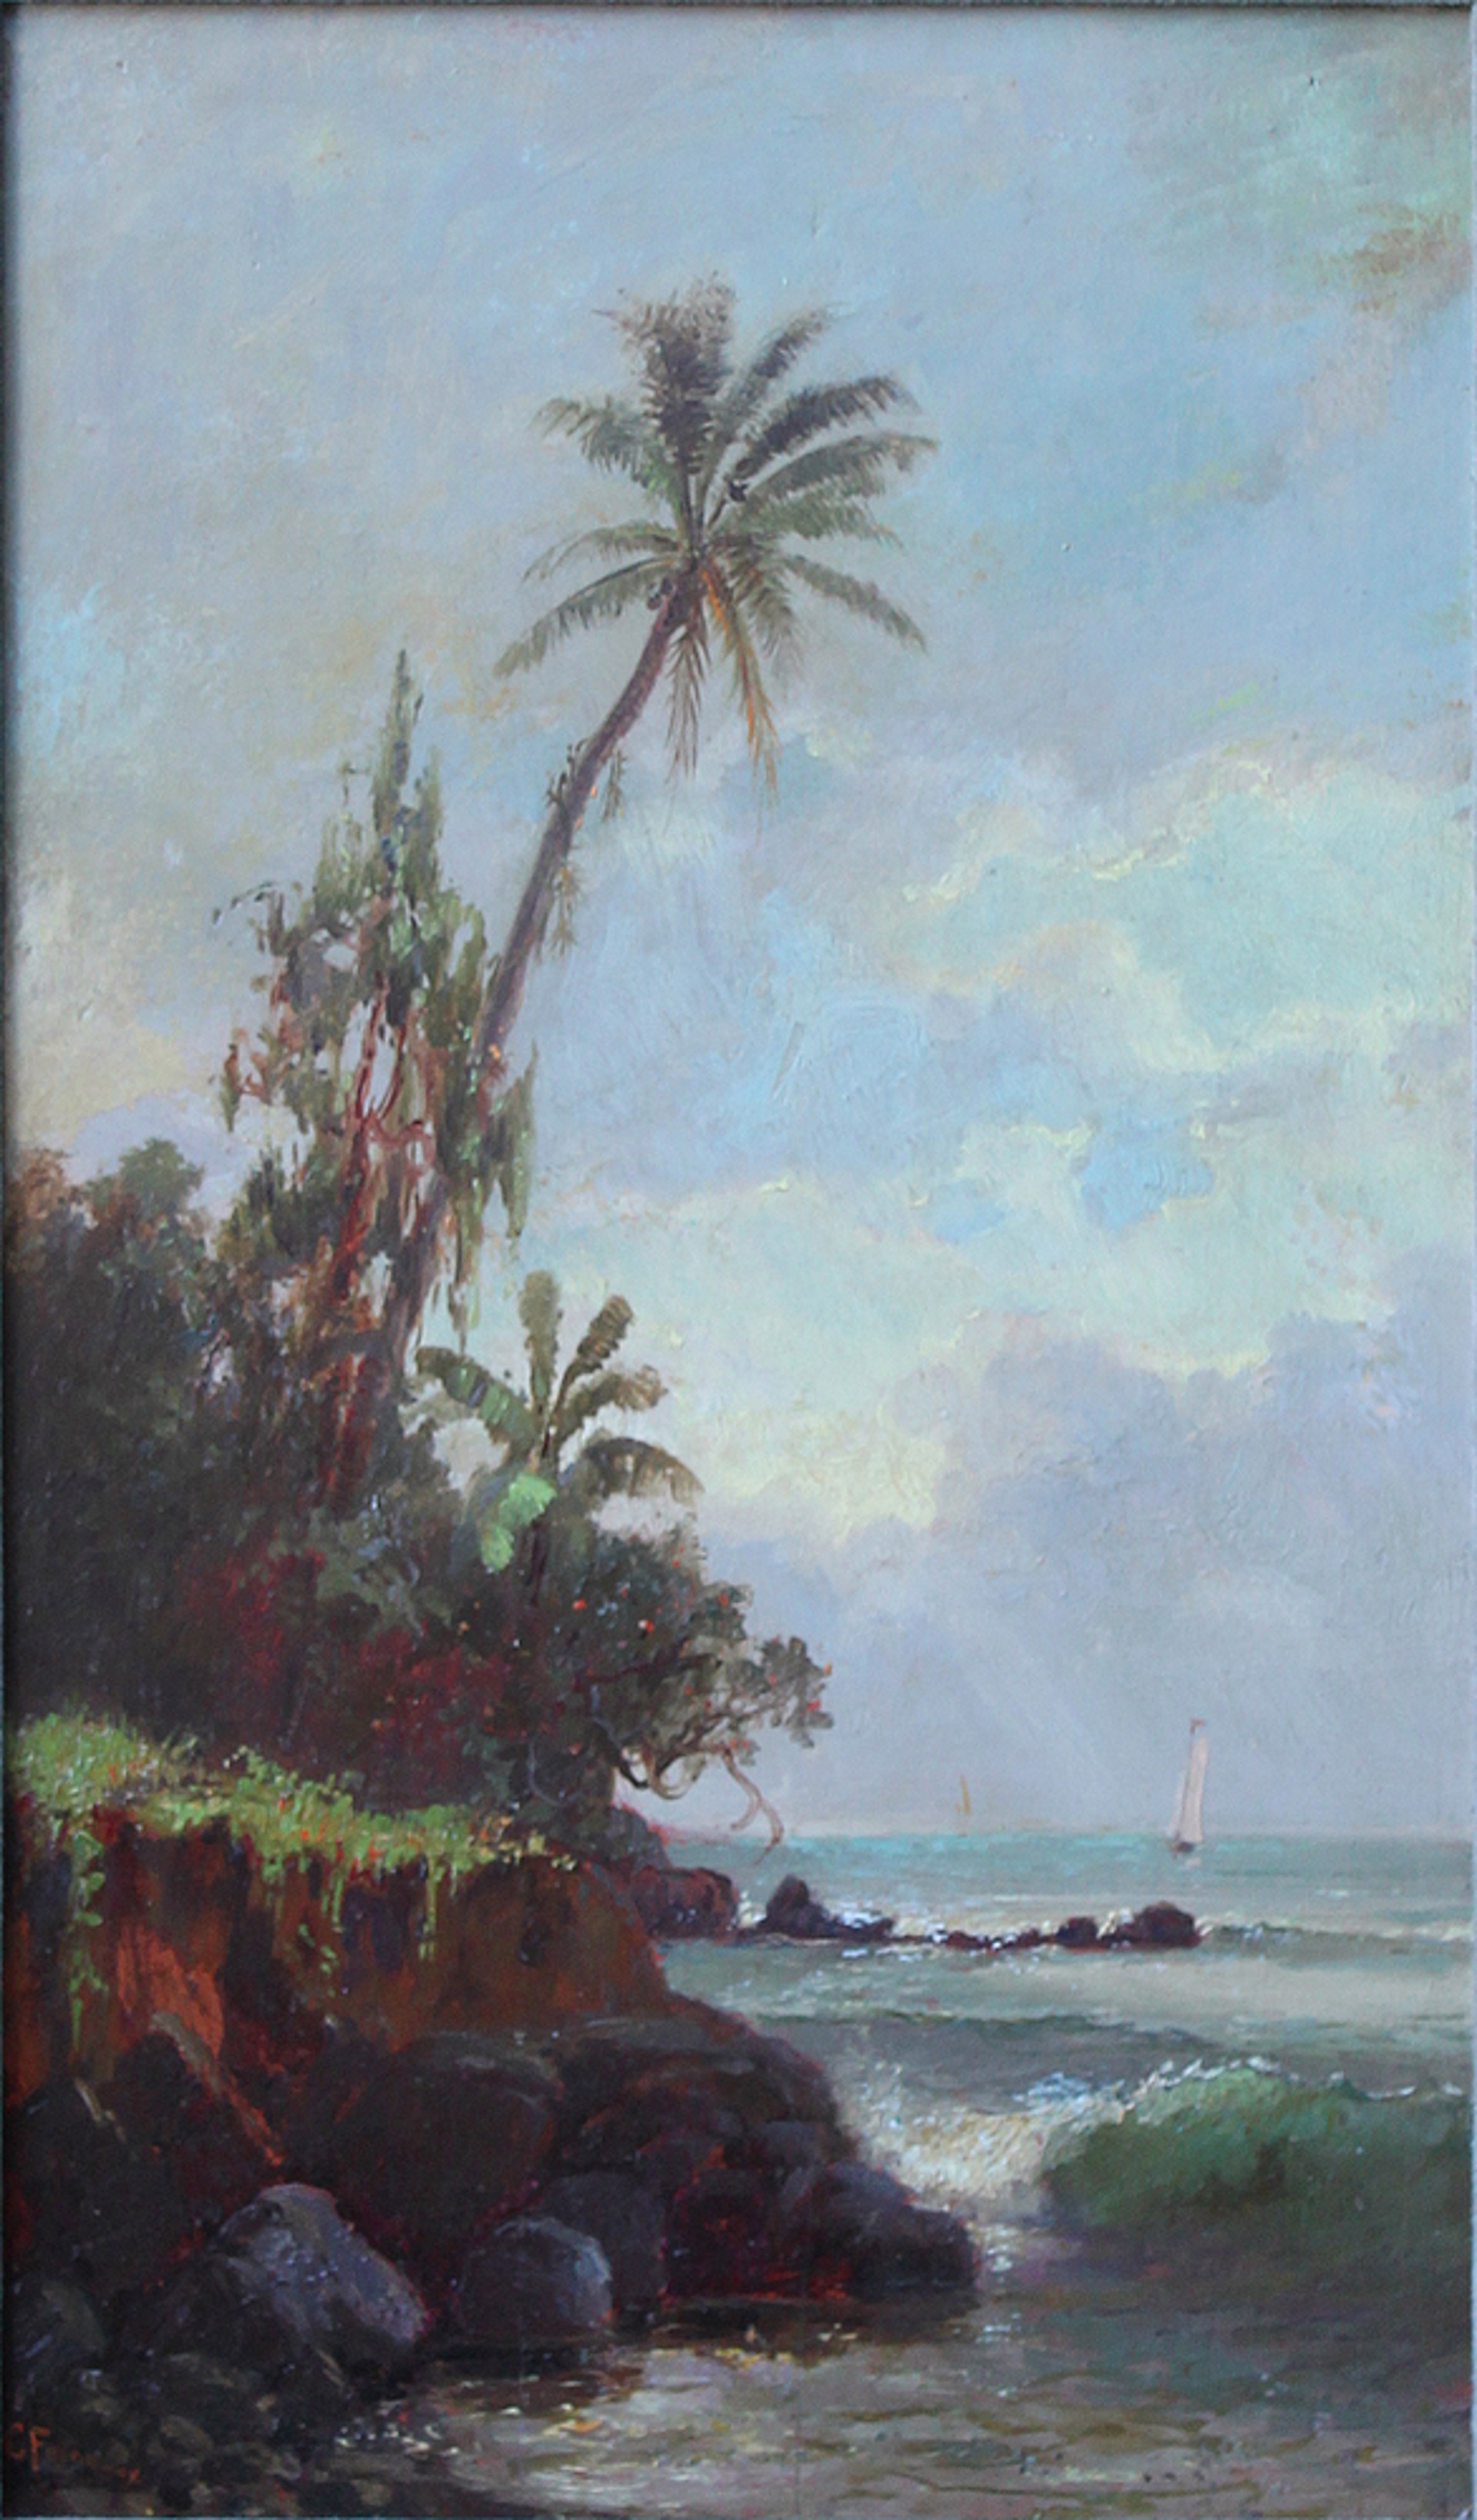 Seascape by Charles Furneaux